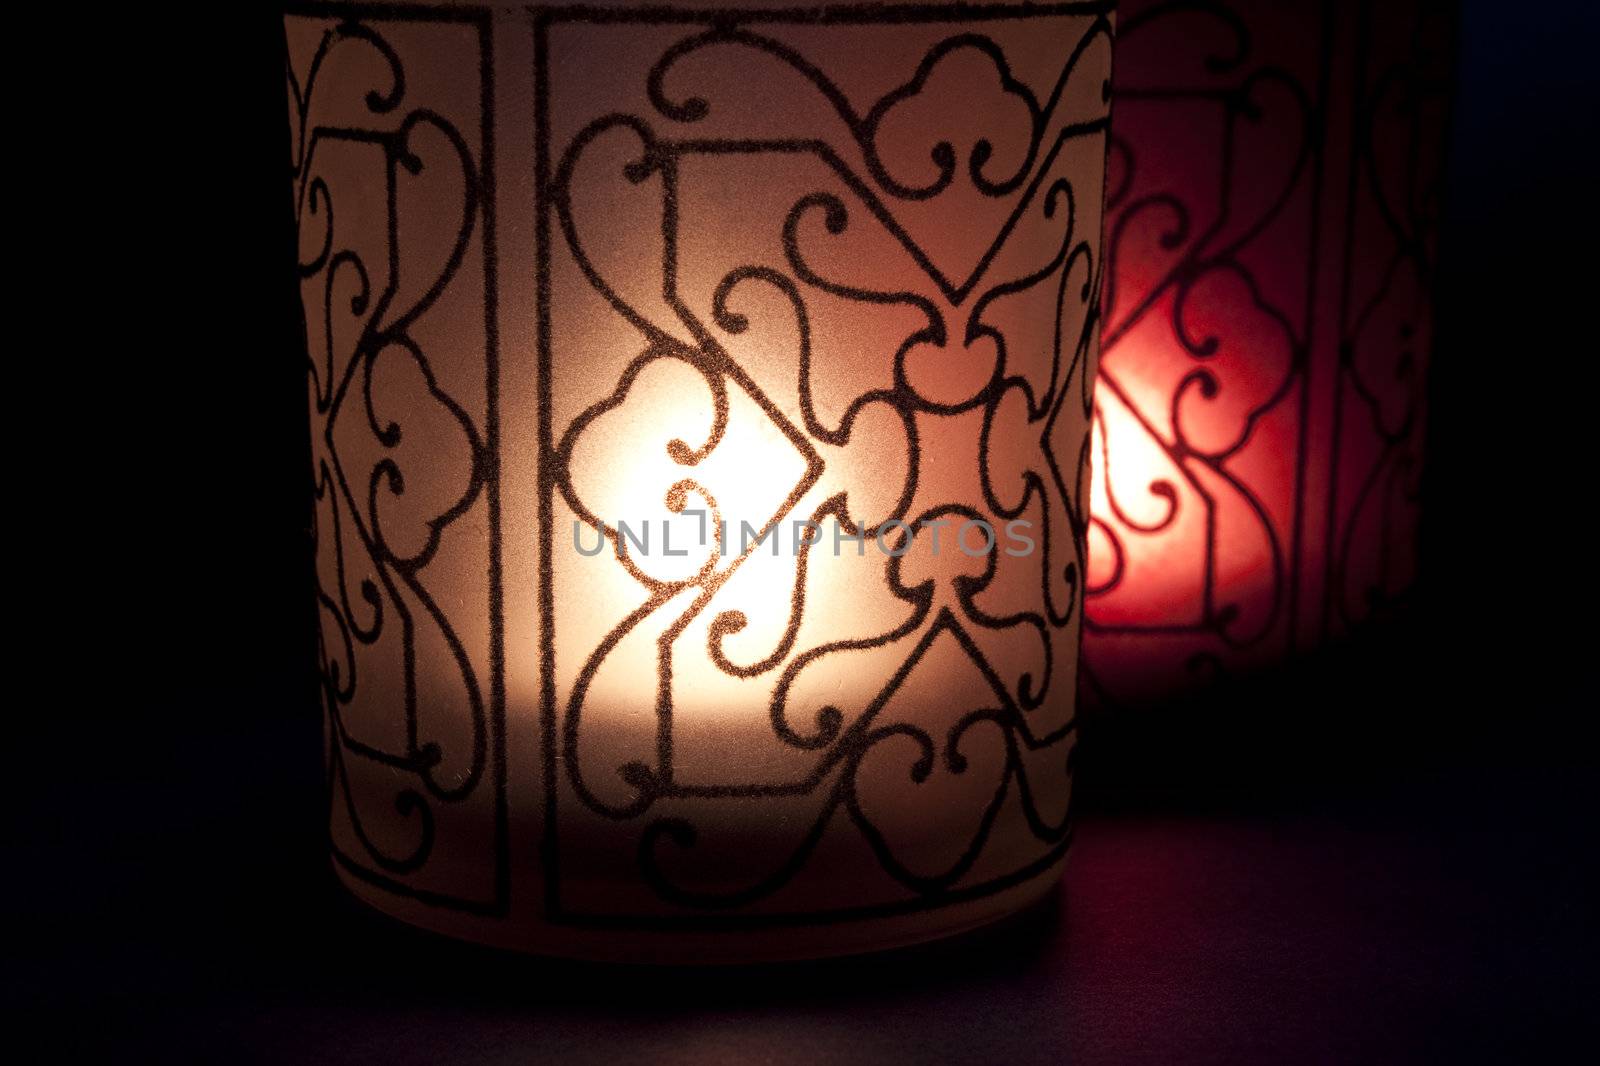 Stylized candles with light by Arsen